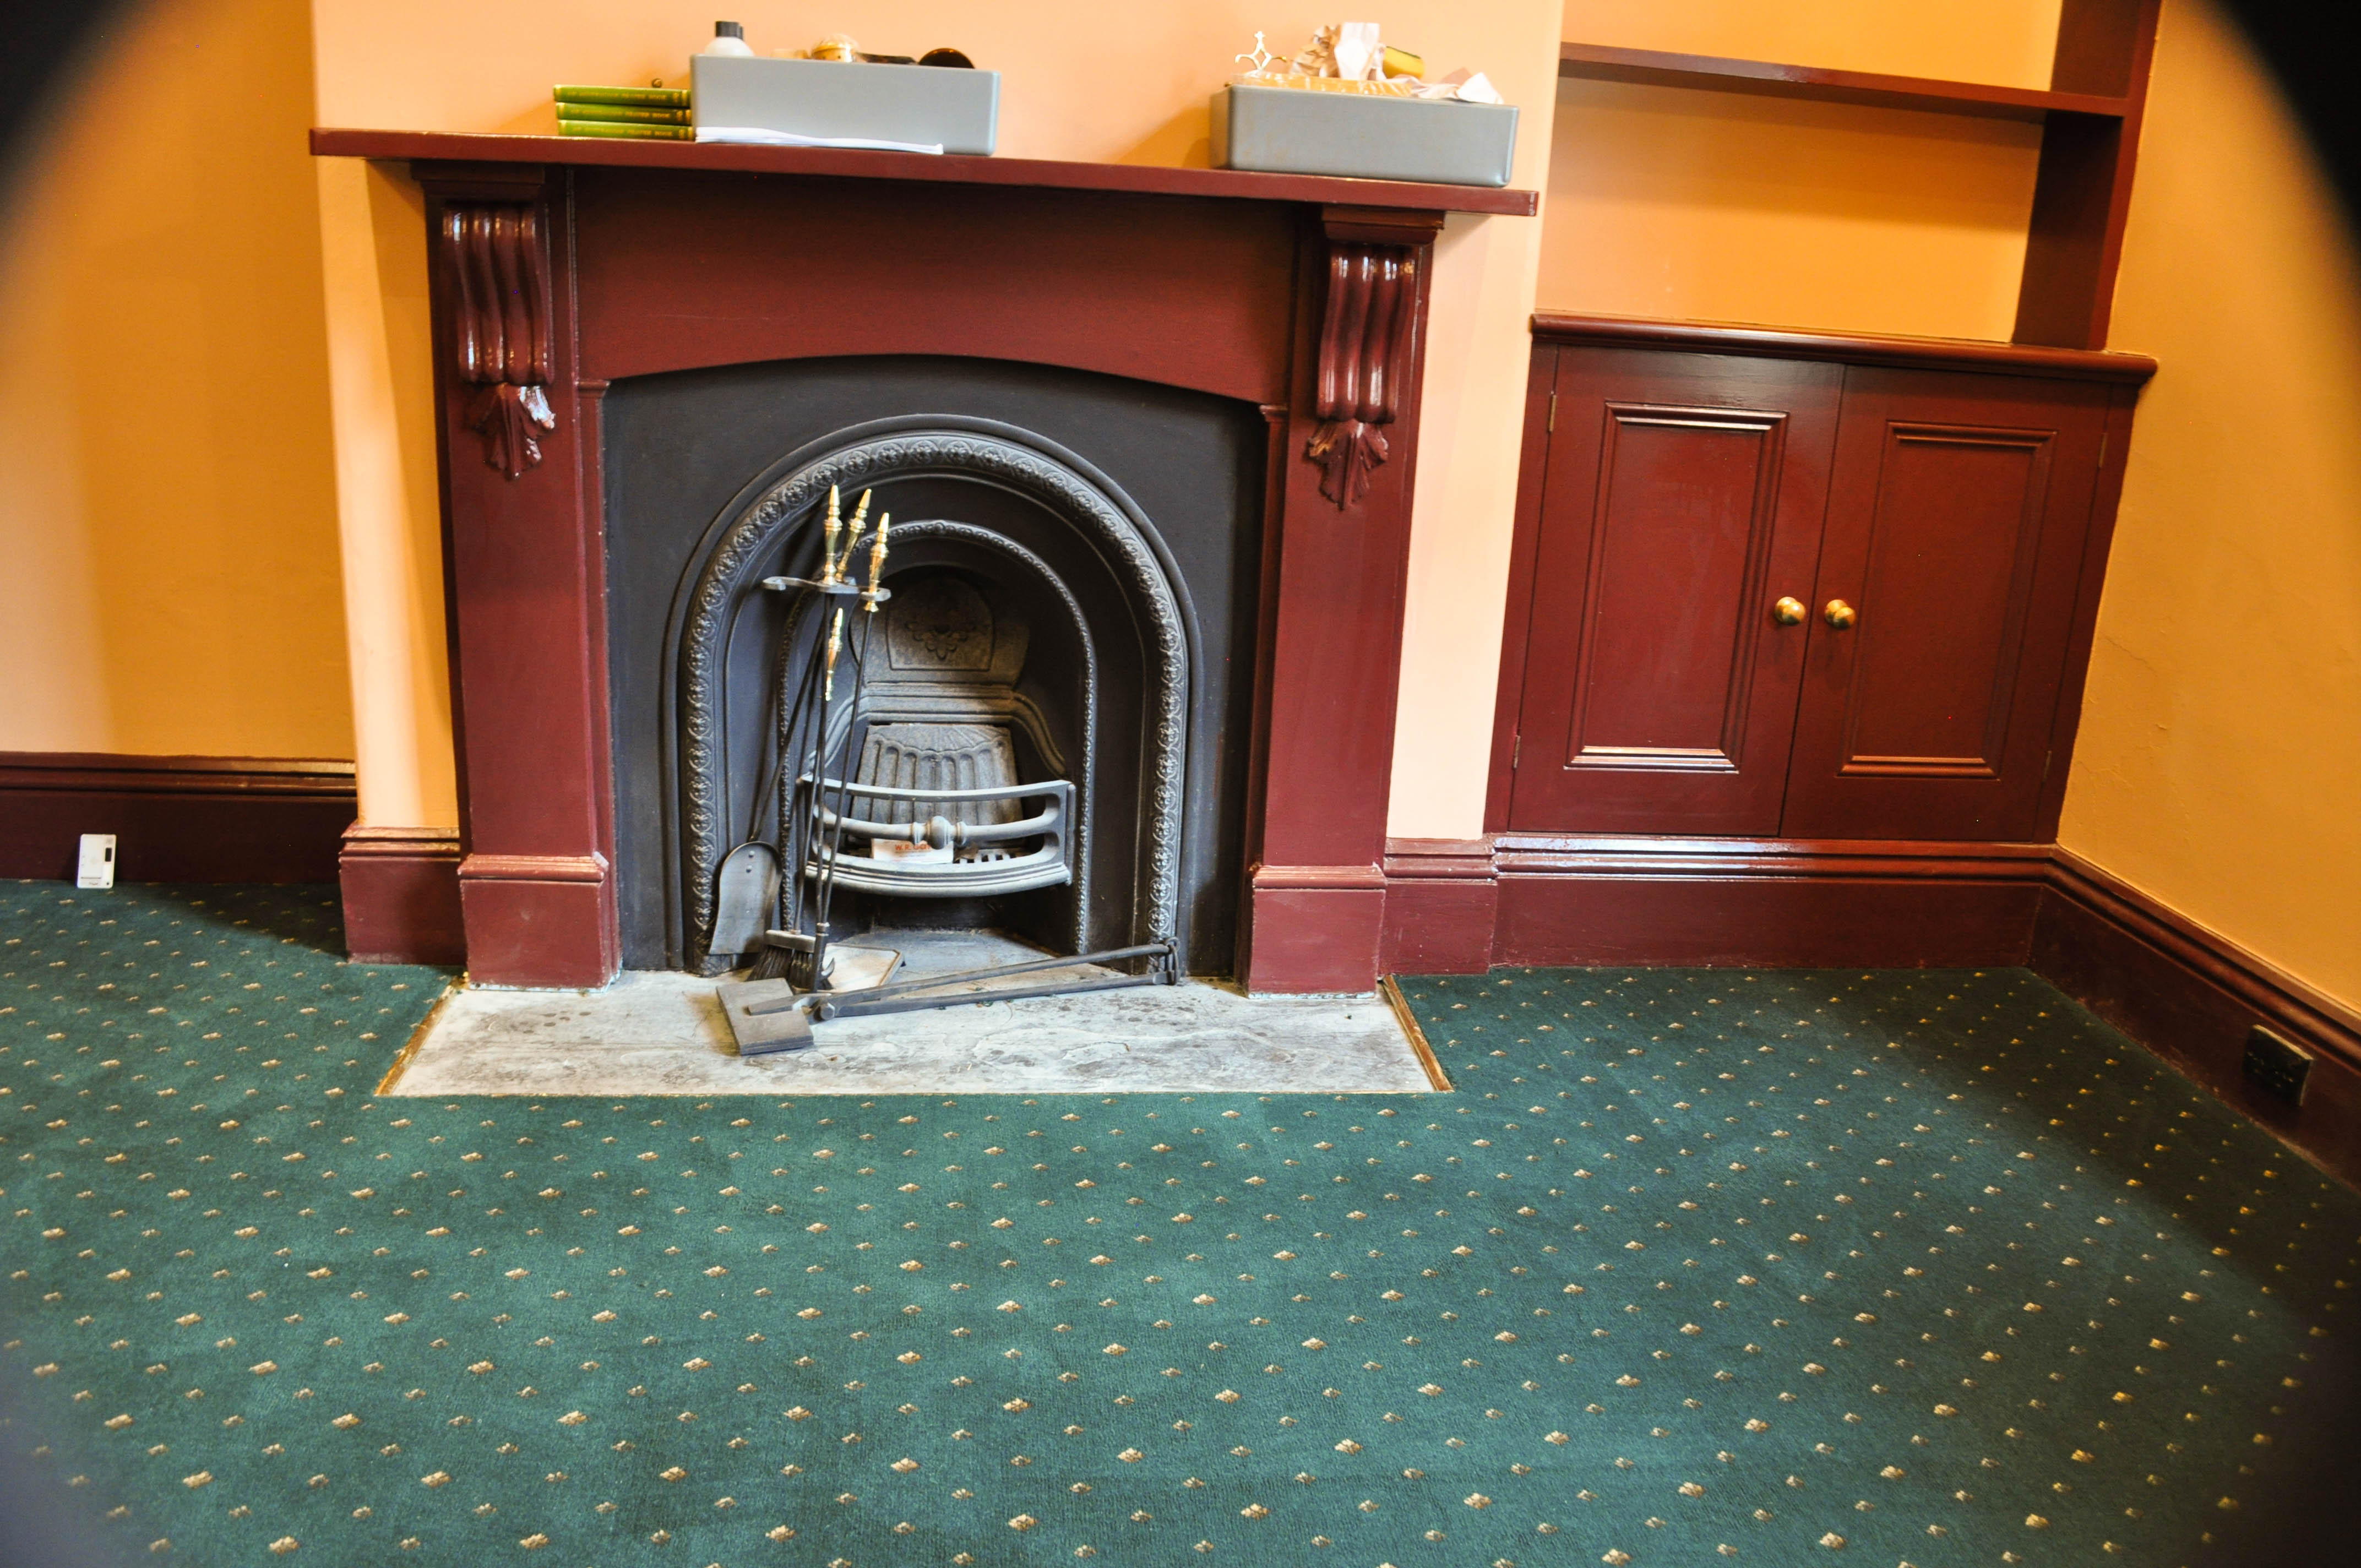 a room in the interior of a period home utilizing, a green carpet color and a period style of patterned carpet it being an aximnister carpet.
 The carpet meets a tan fireplace with a stone hearth floor. The walls are painted a deep orange color, which is period decor. The scheme is triadic, utilizing all three
 primary colors, red, blue and yellow. The home is in Melbourne, Vic 3000 and the carpet installed by Concord Floors.